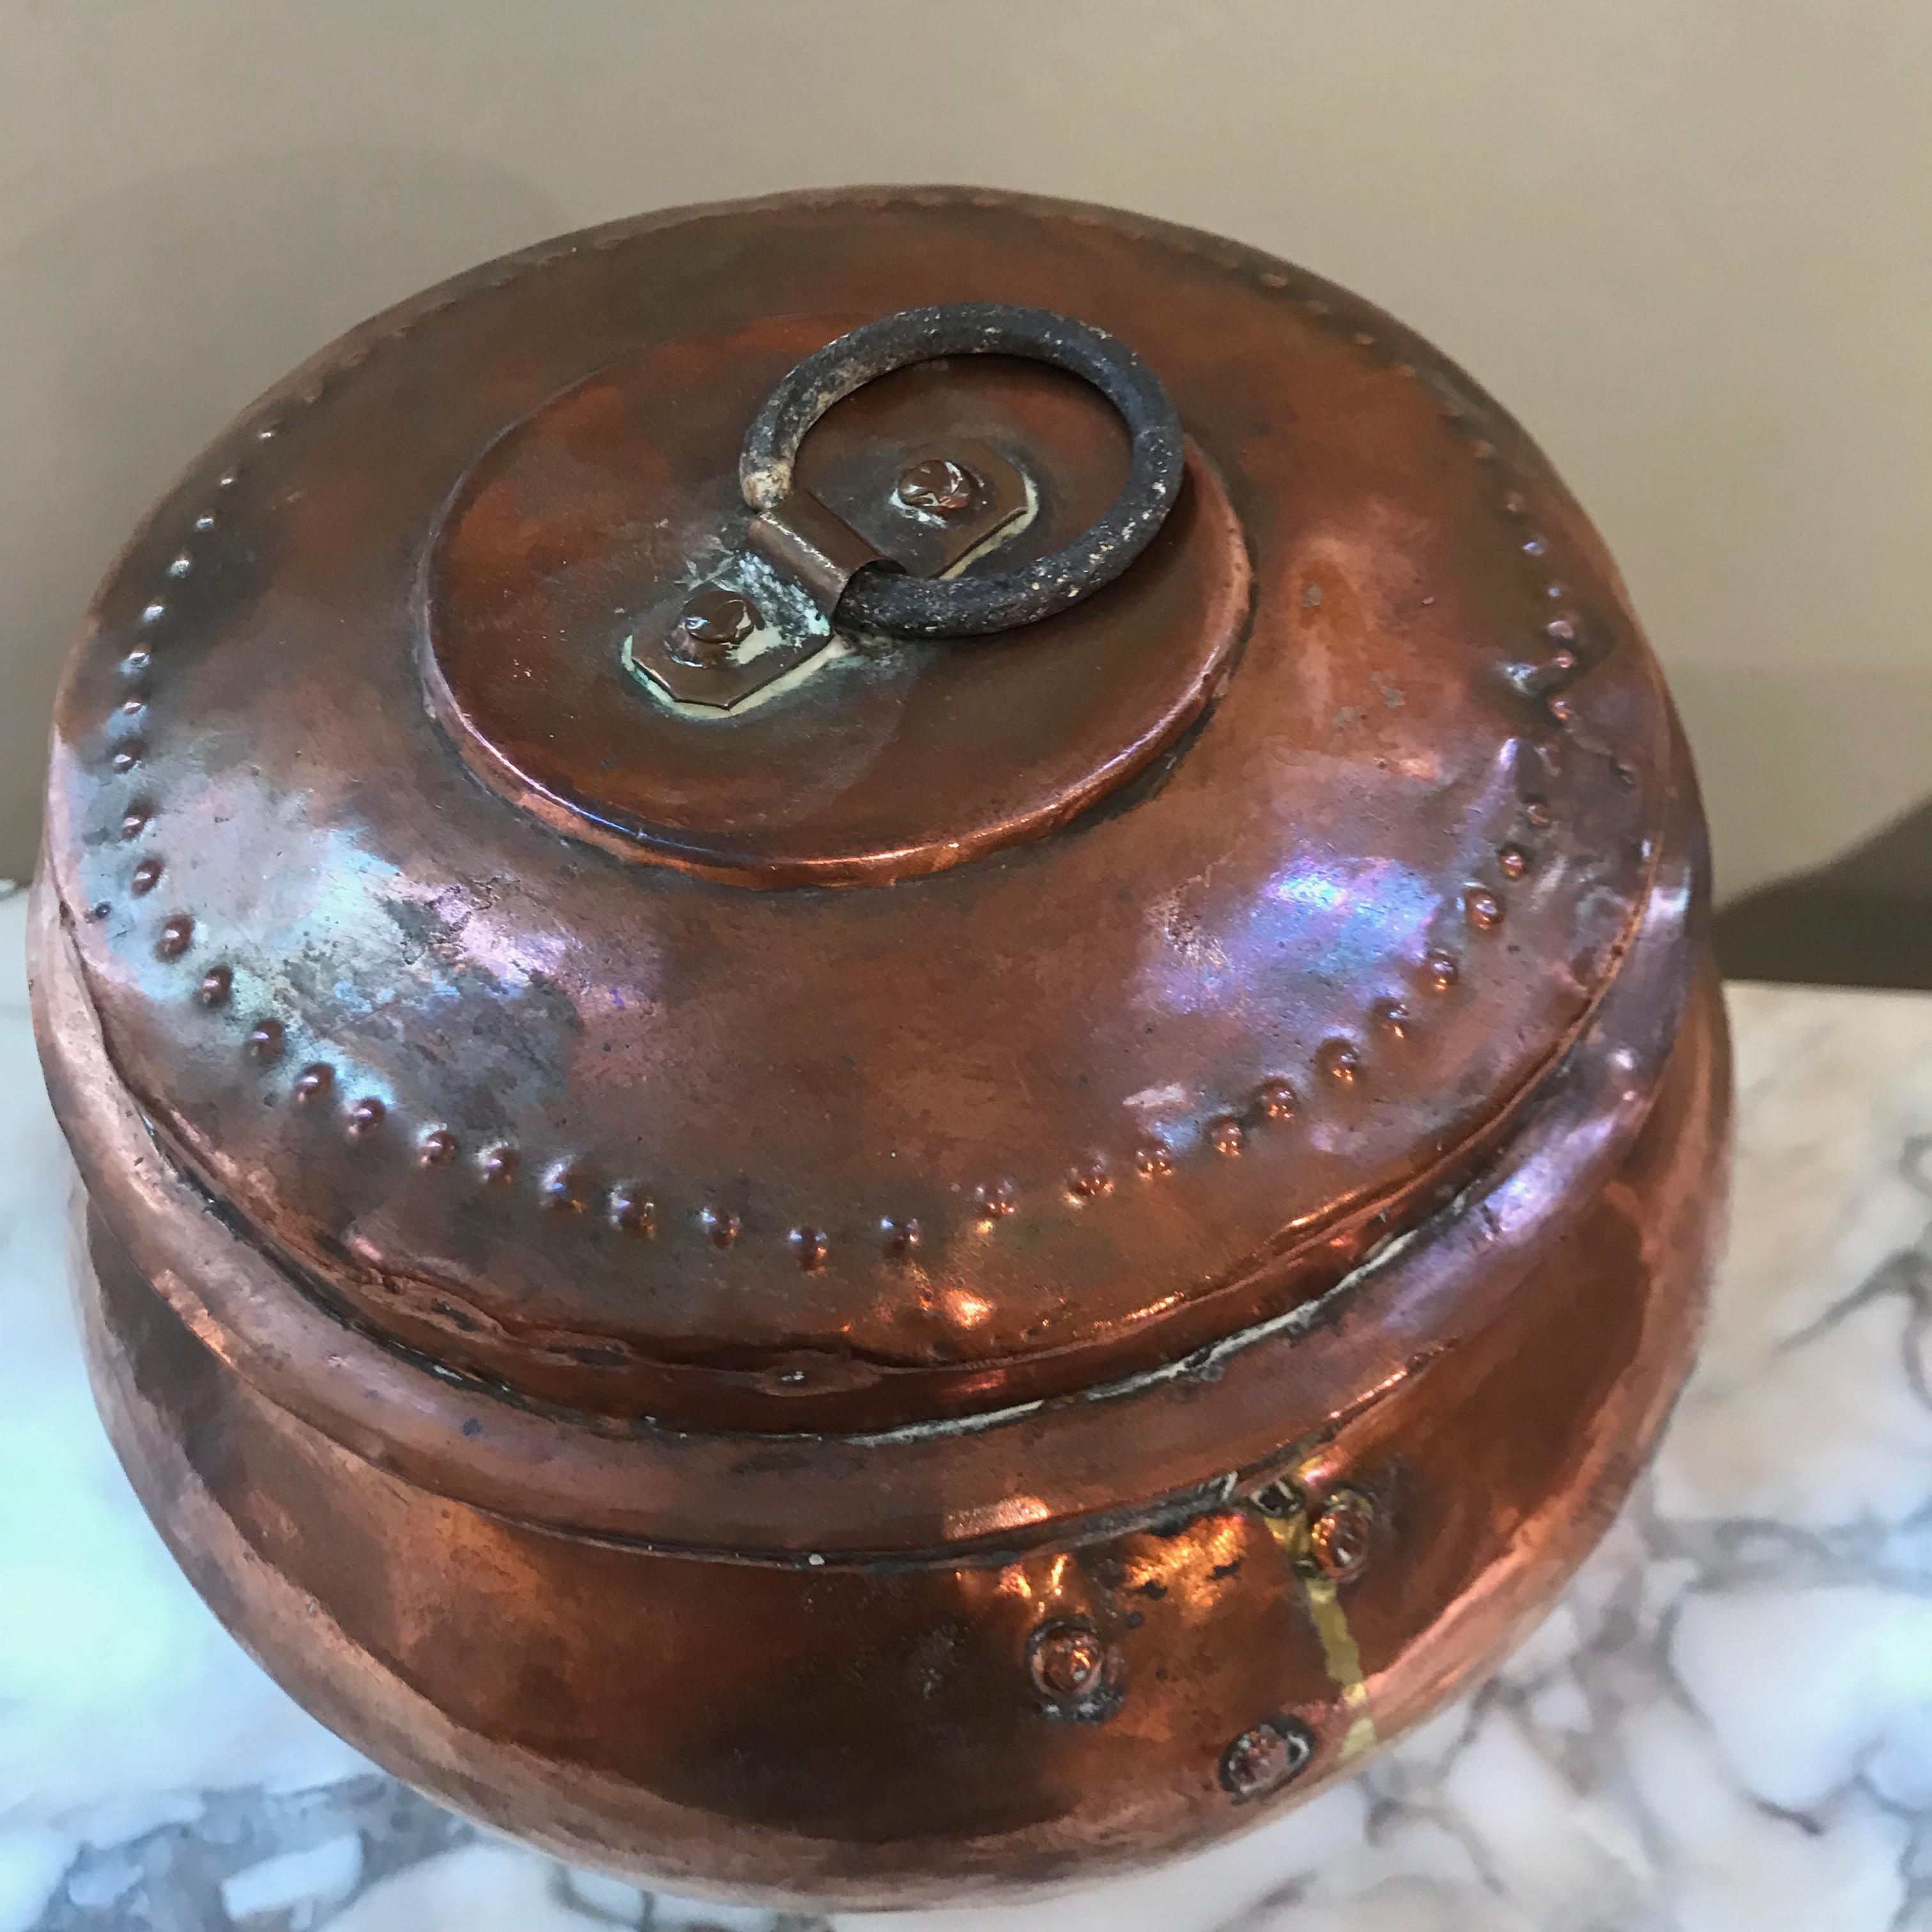 Very decorative Swedish copper covered urn with ring handle. Elegant undulating classical urn shape with the rustic quality of copper kitchenware of the north of Sweden.